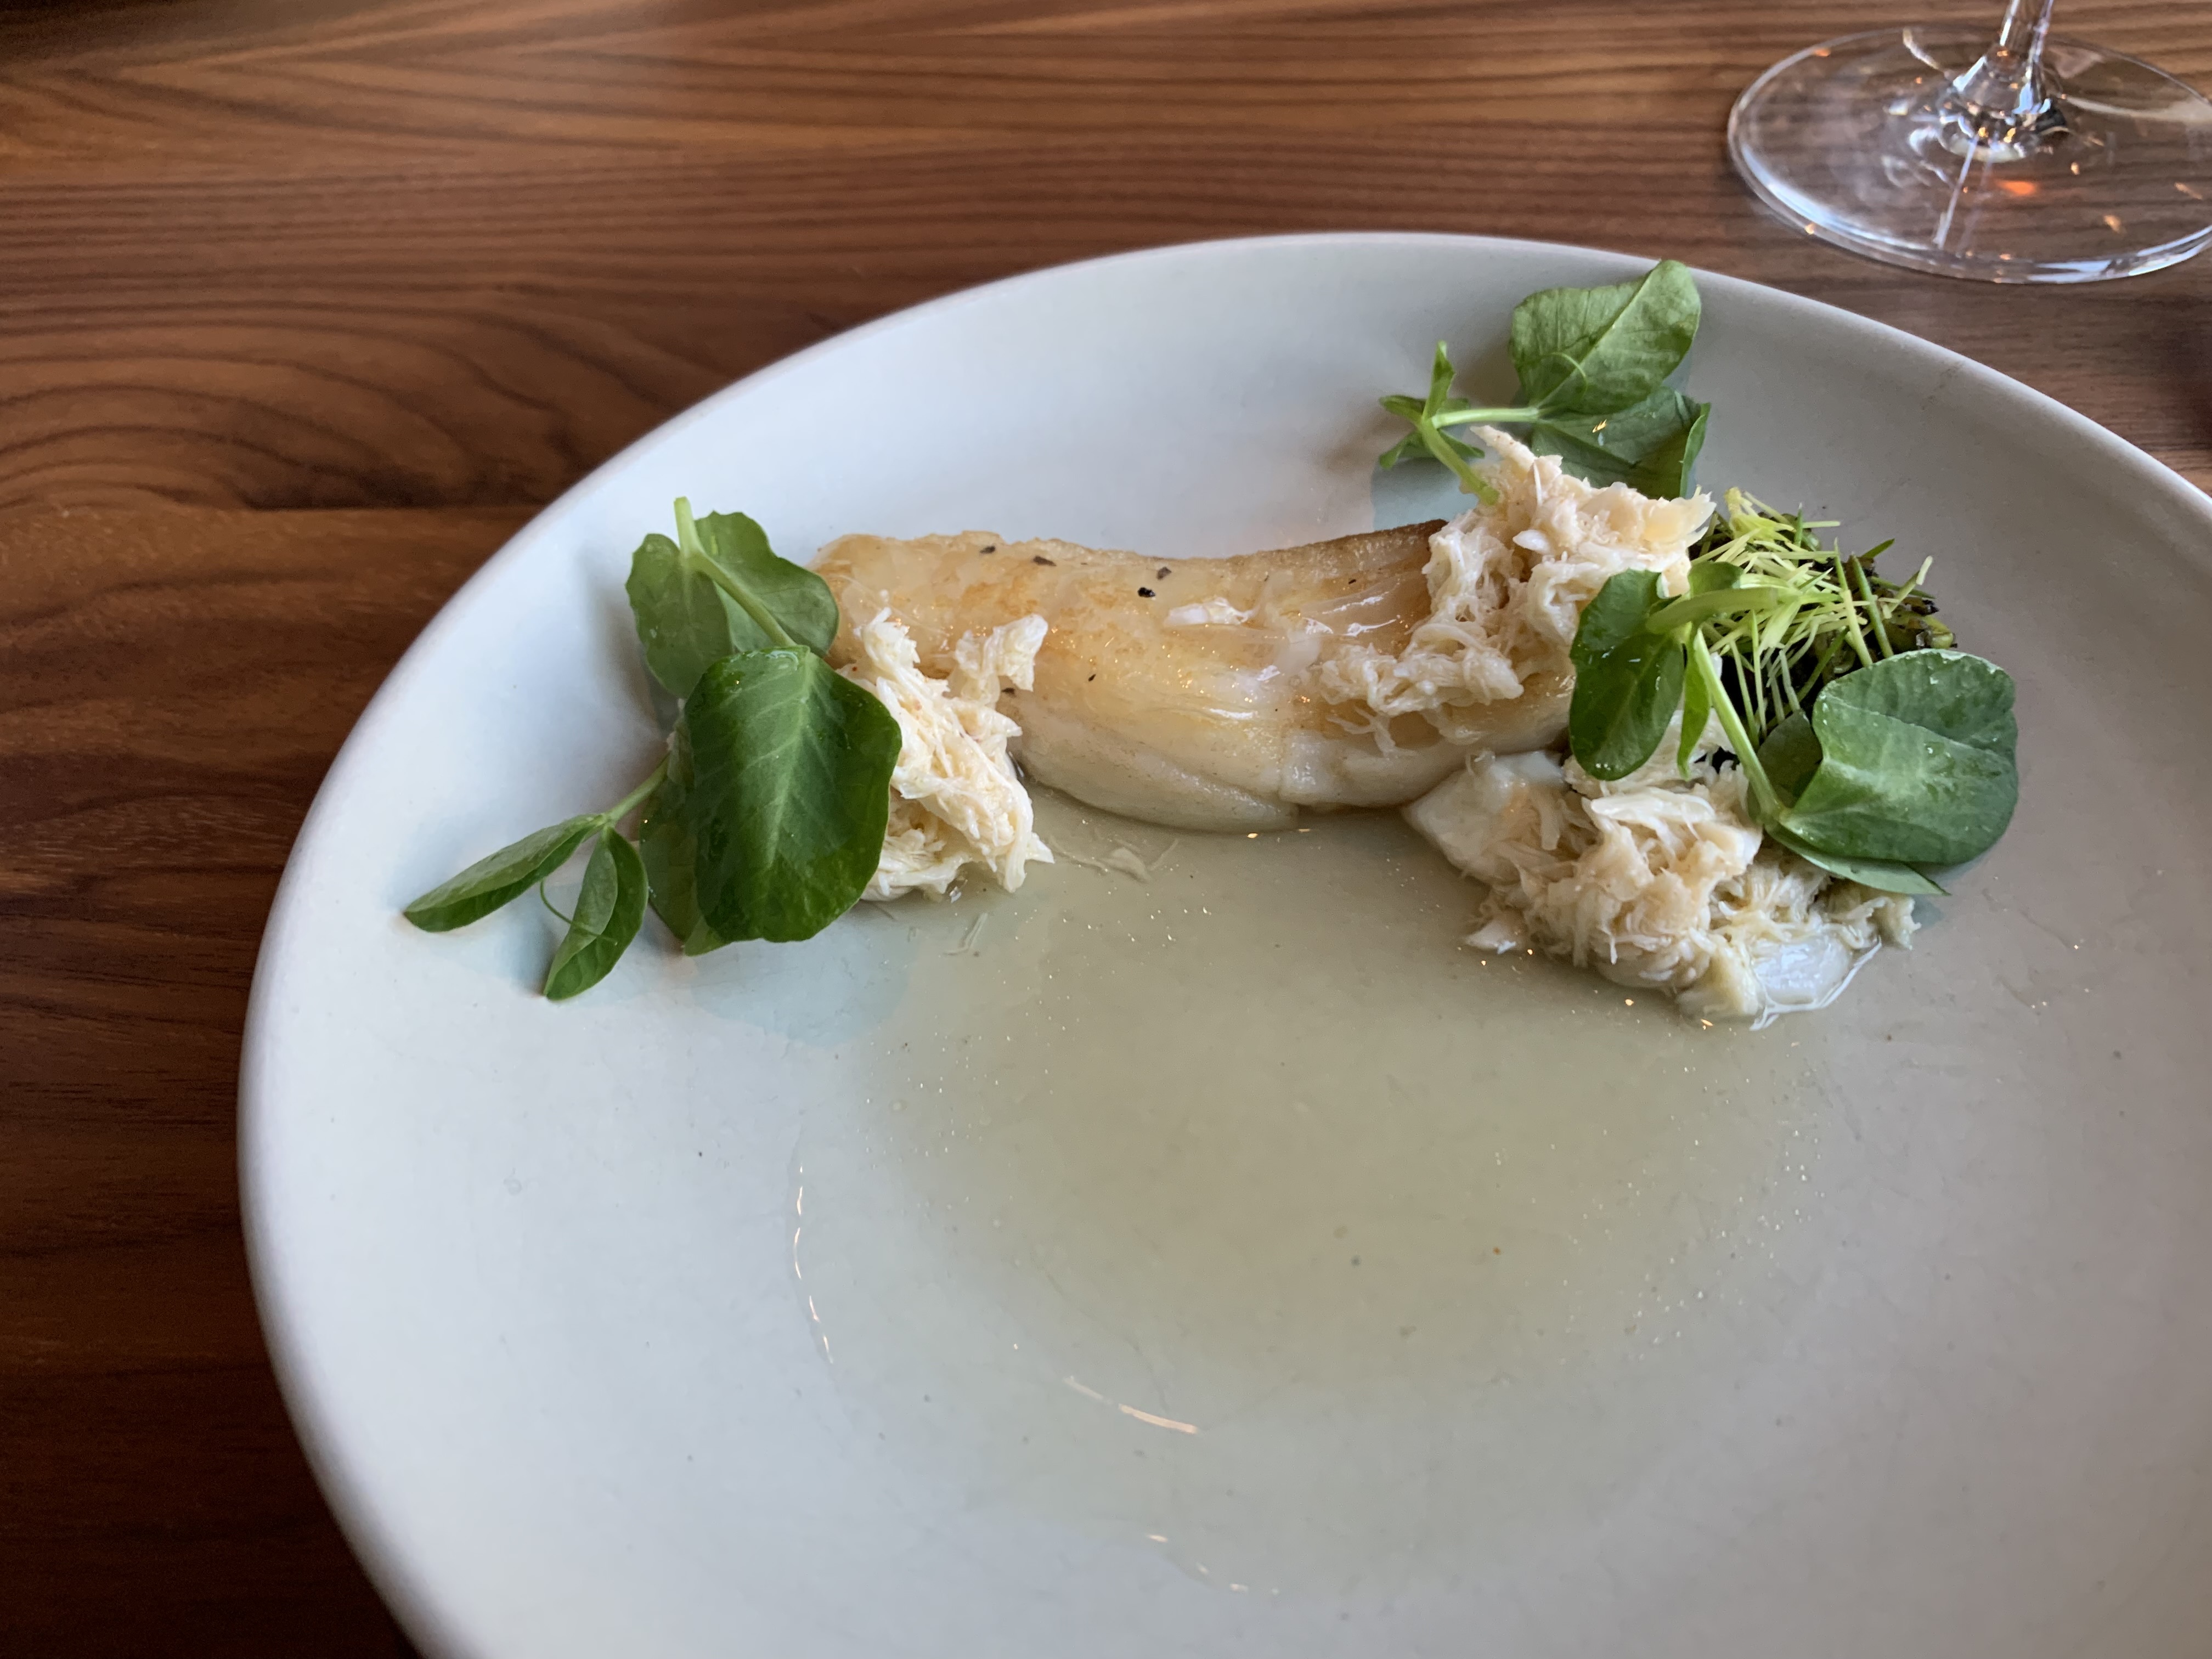 Small cod fillet at the top of a plate, with mounds of crab meat around it, and a few greens accenting it. Directly beneath the filet is a small pool of sauce. The plate is reminiscent of a log next to a pond.